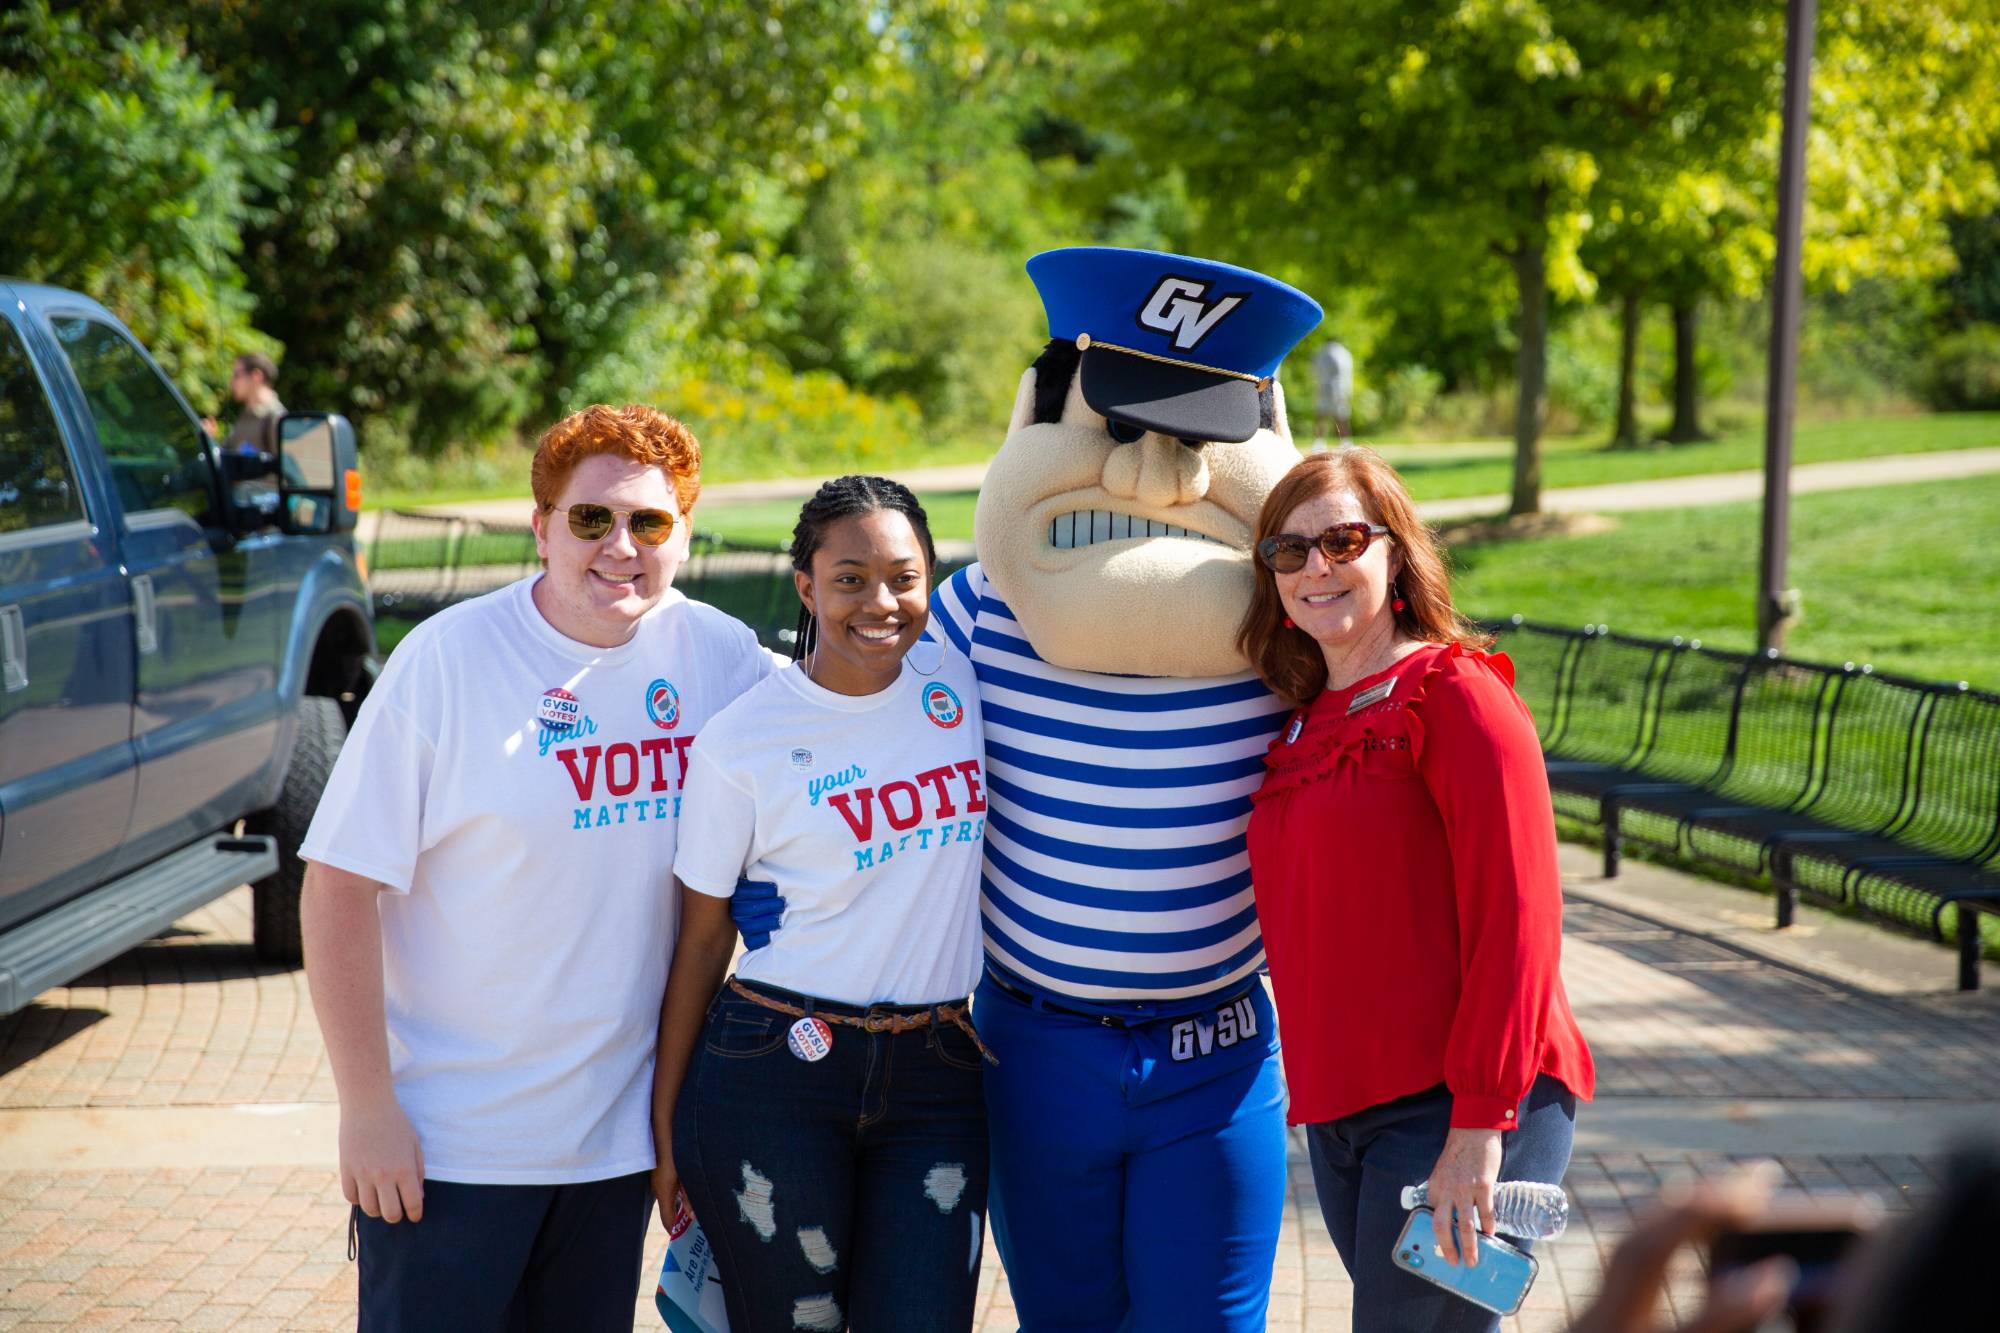 Student voters with Louie the Laker